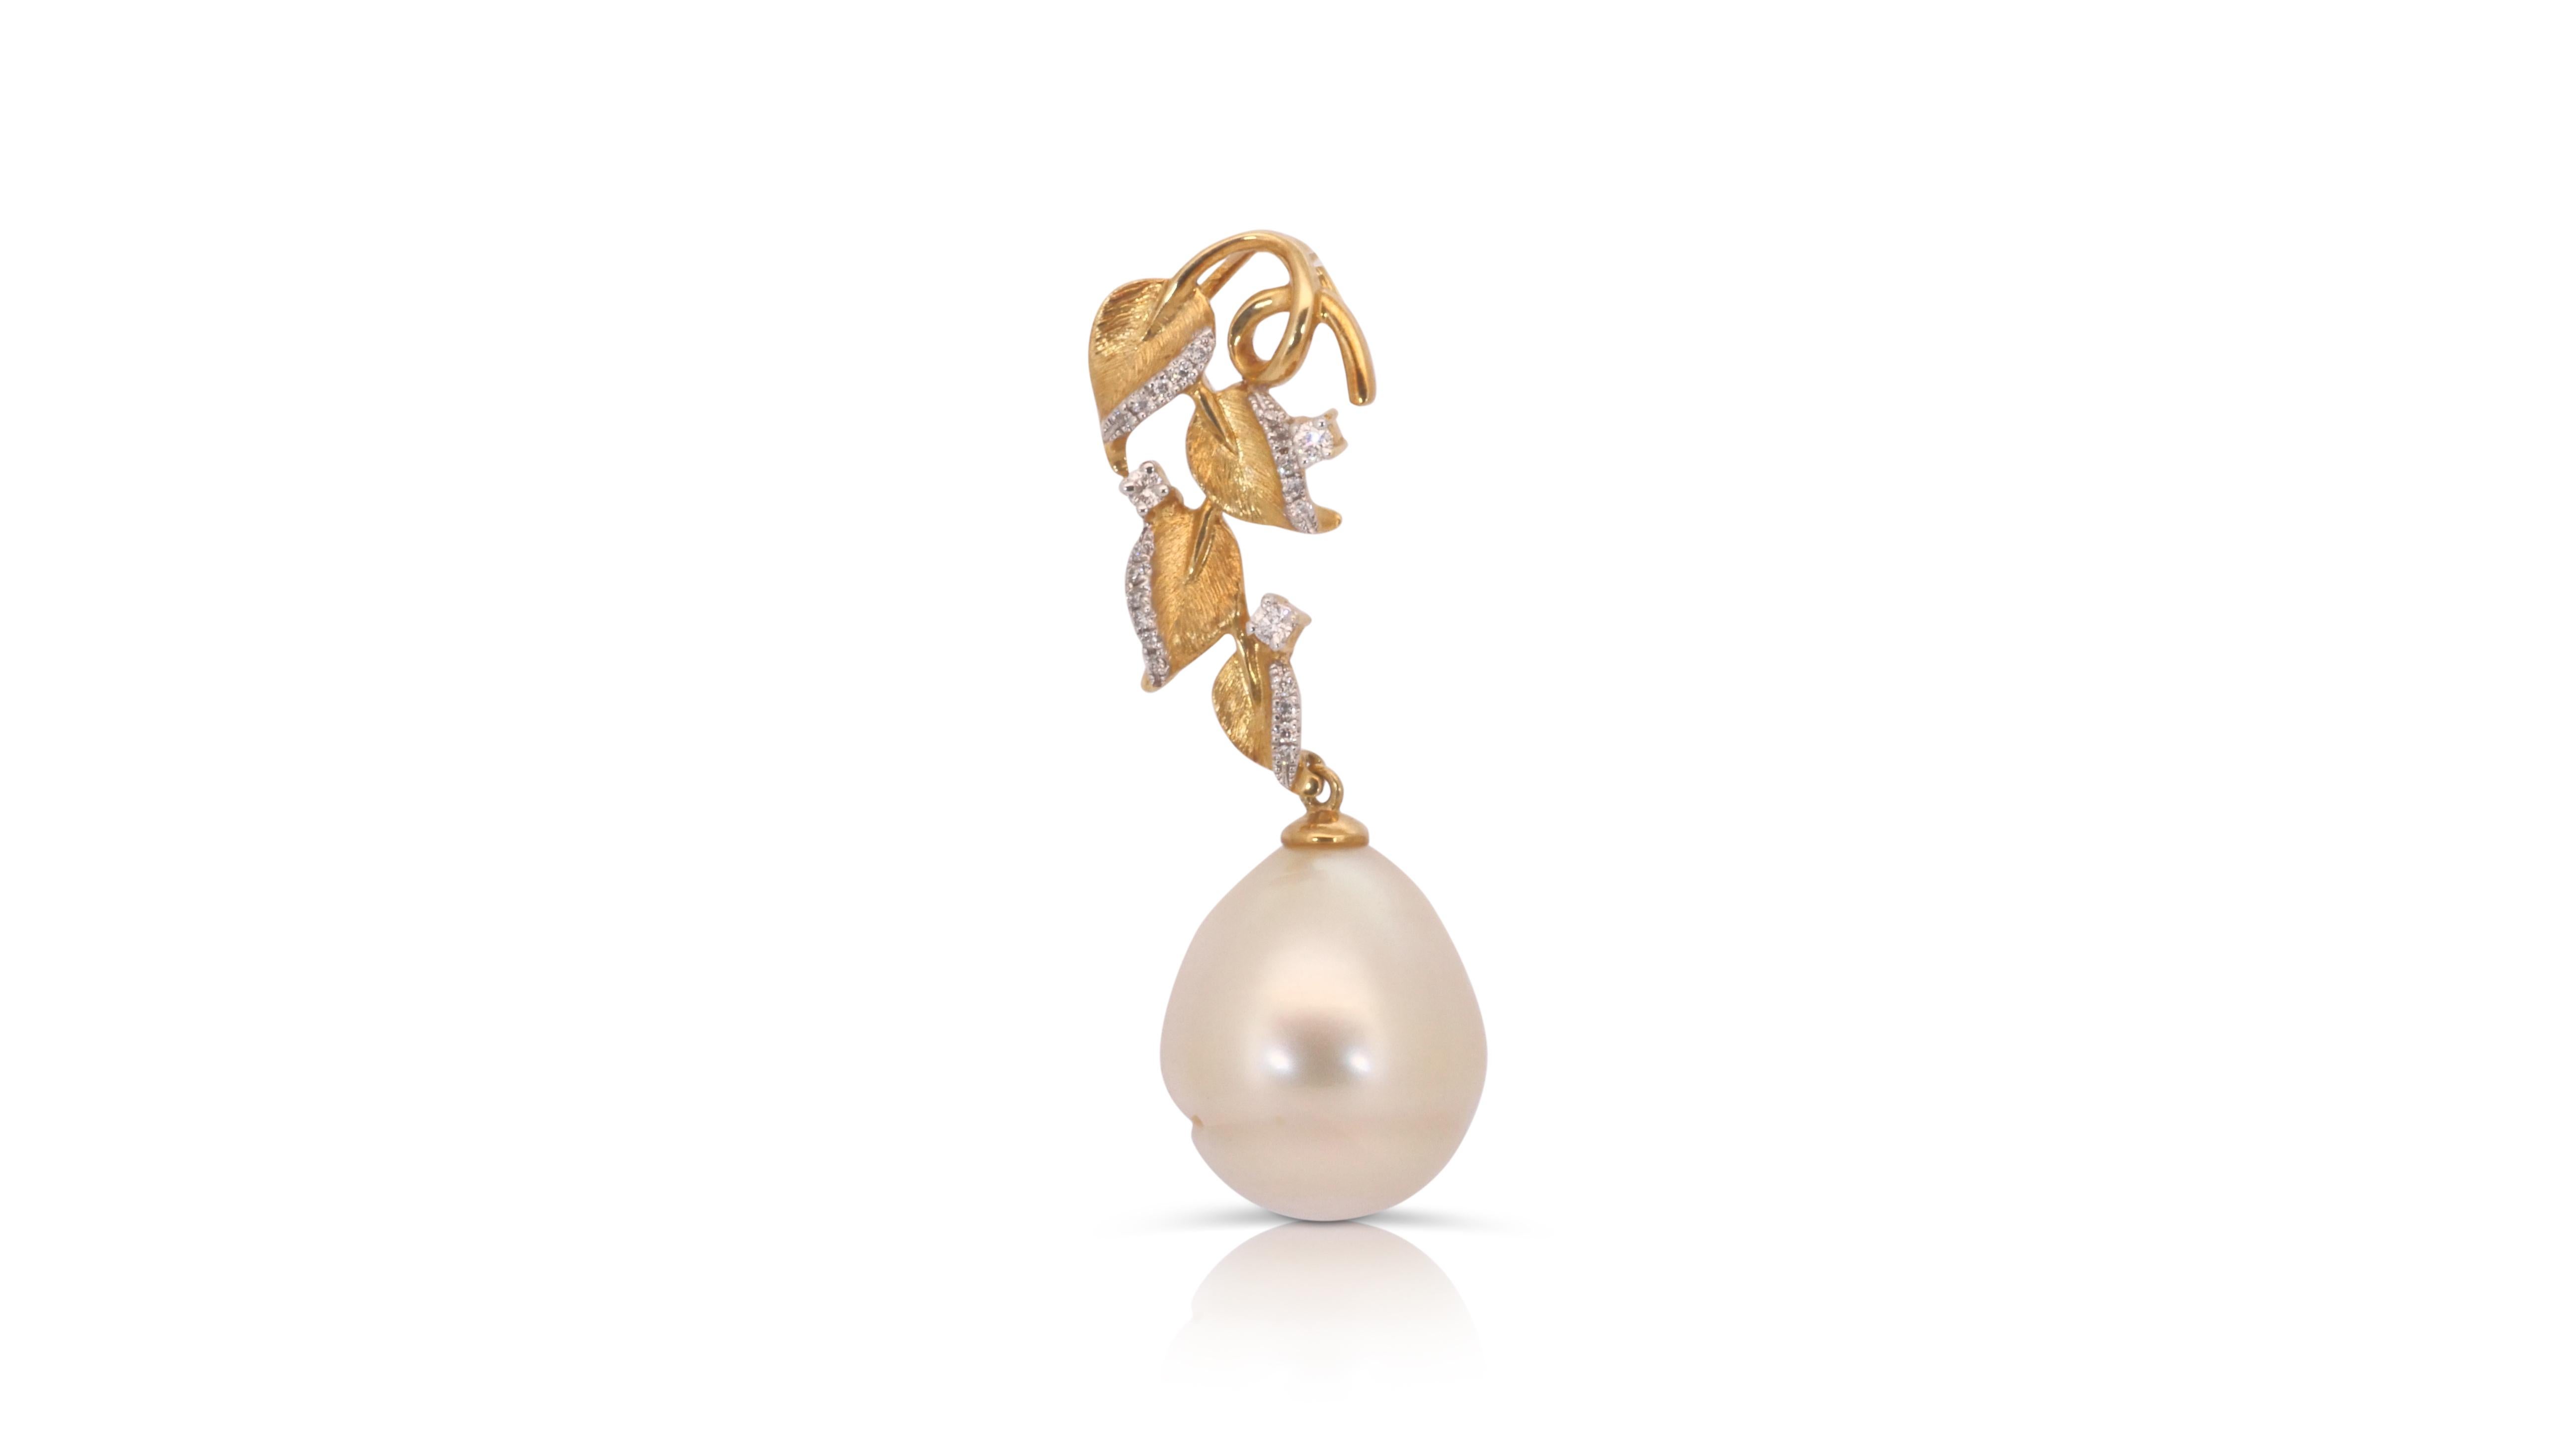 Splendid 18k Yellow Gold Pendant w/0.1 Carat Pearl & Diamonds-Chain not included In New Condition For Sale In רמת גן, IL